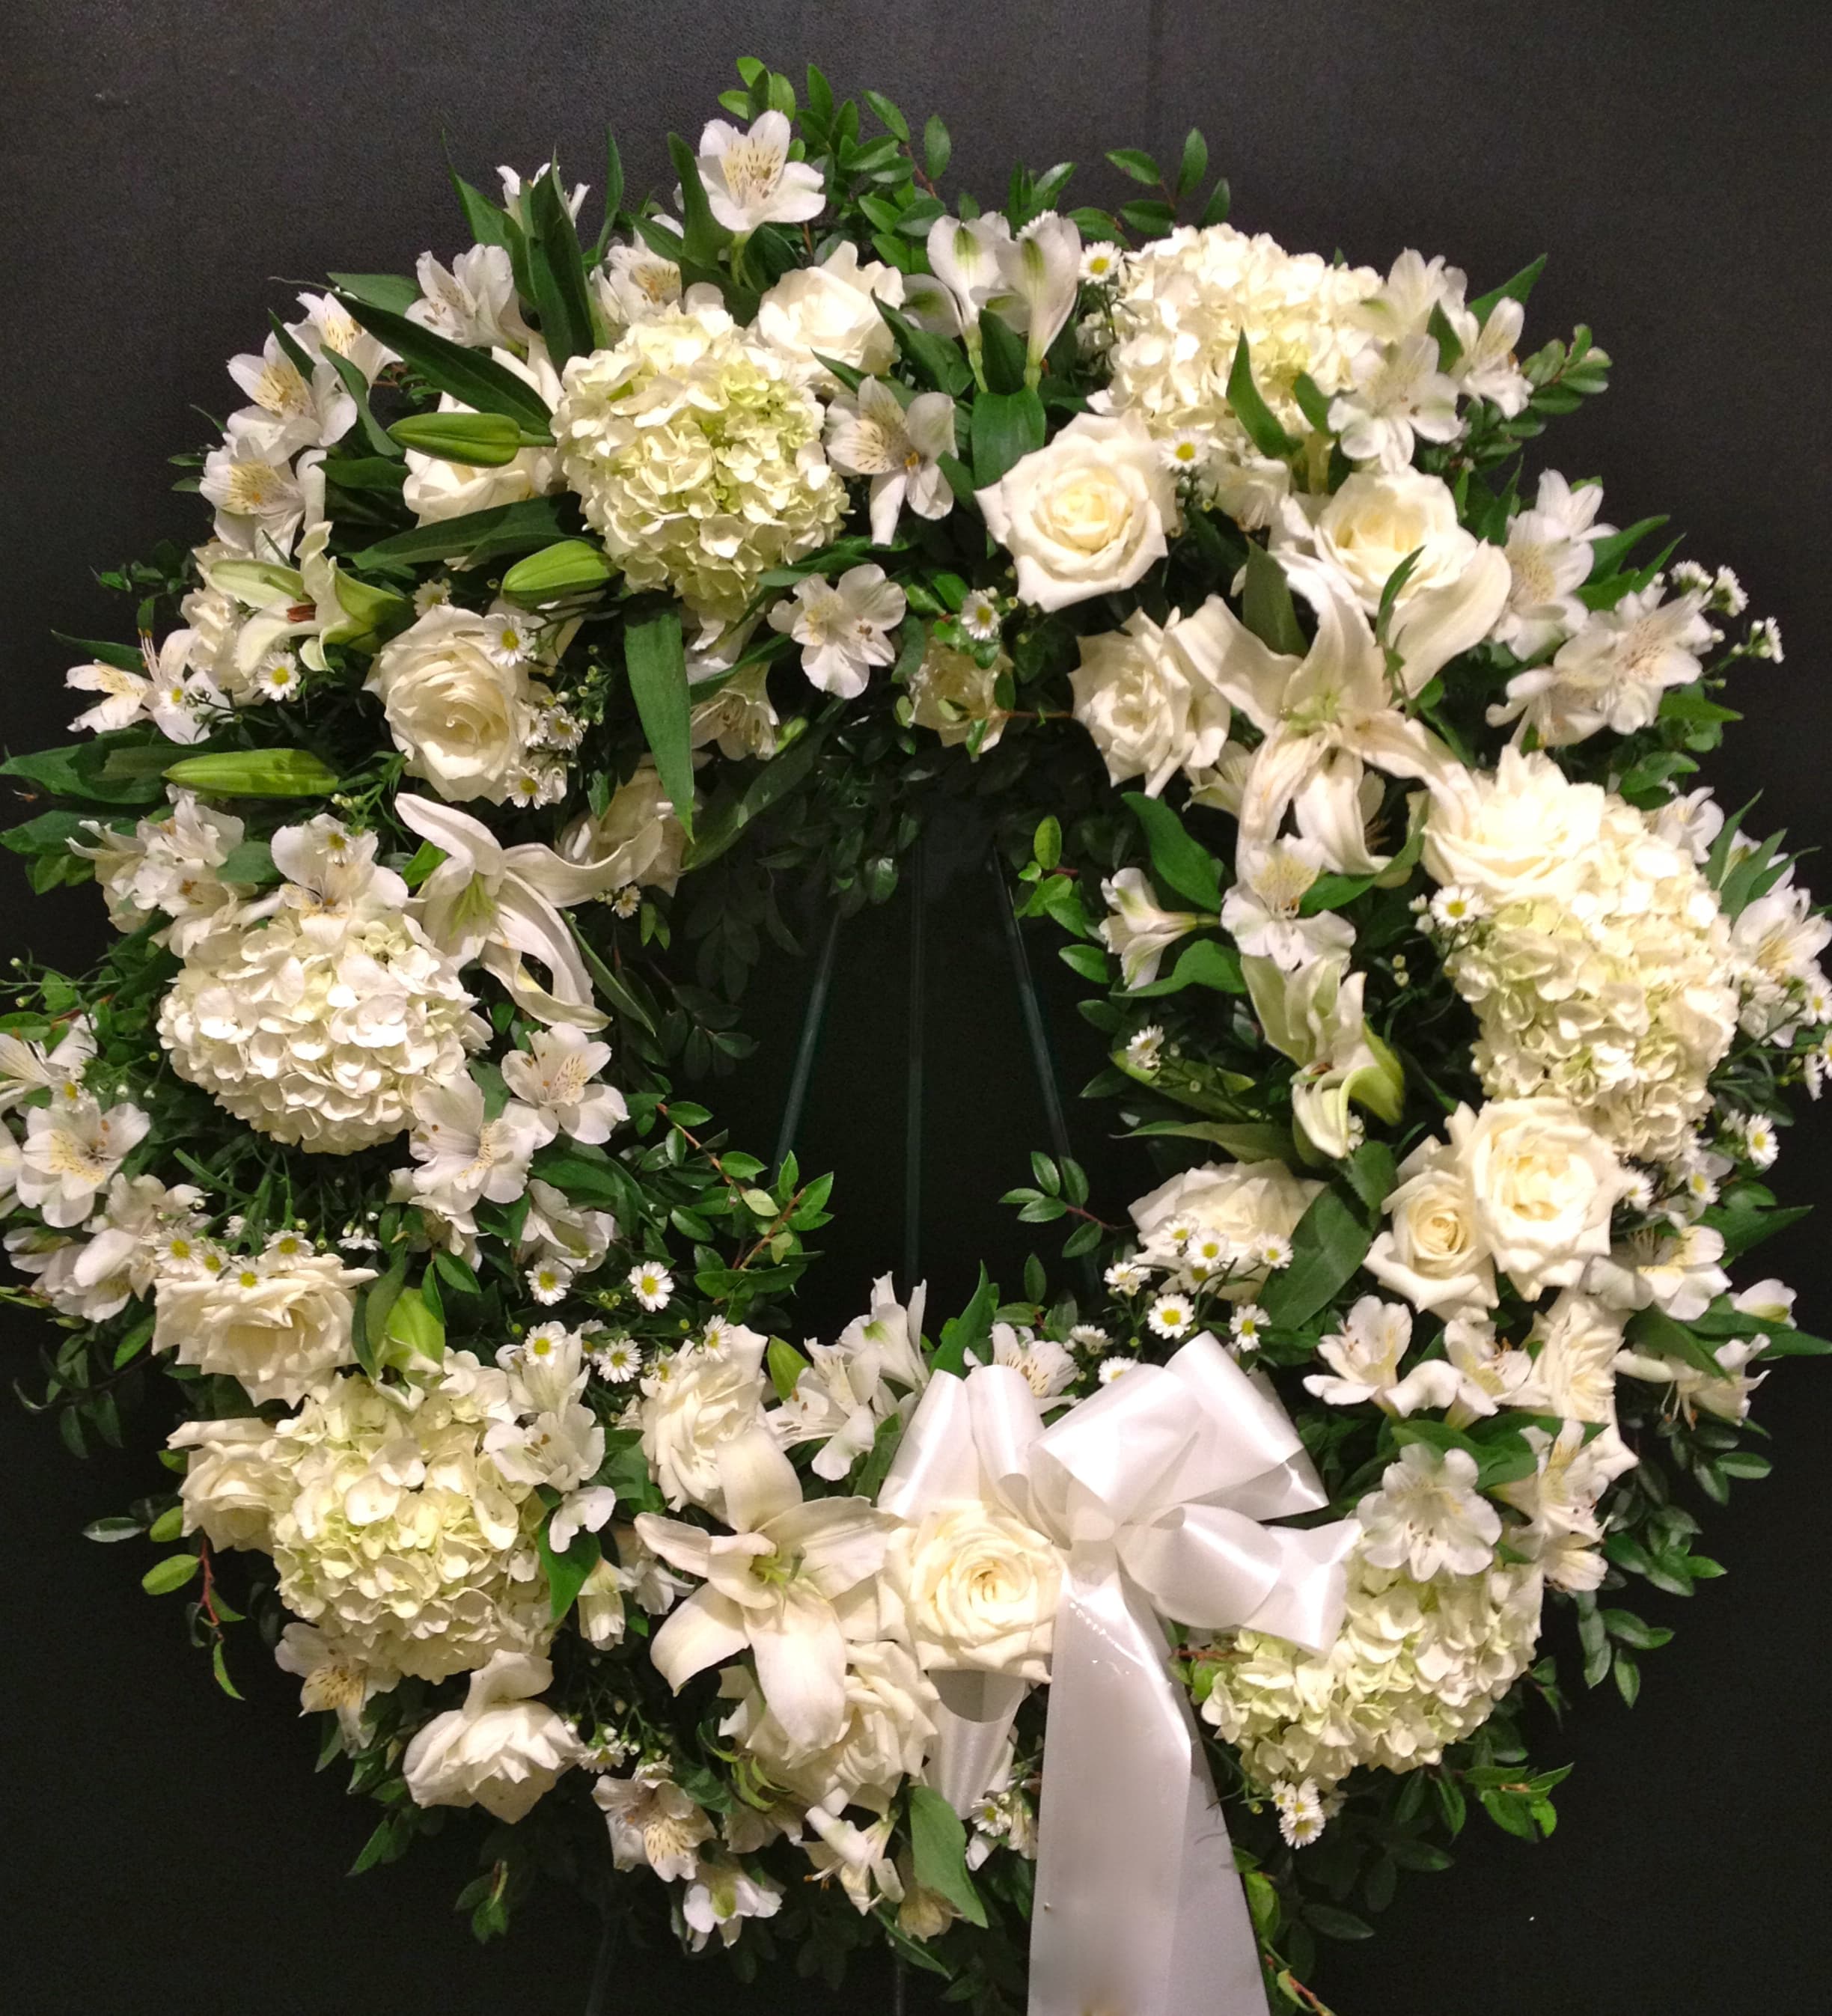 All White Wreath - A pure and delicate expression of adoration. This wreath of whites gently embraces loving memories, and offers solace and sweet thoughts at a time of loss. Lovely blooms such as White Roses, White Hydrangea, White Lilies and White Alstroemeria are nestled together and accented with White Monte Casino. 